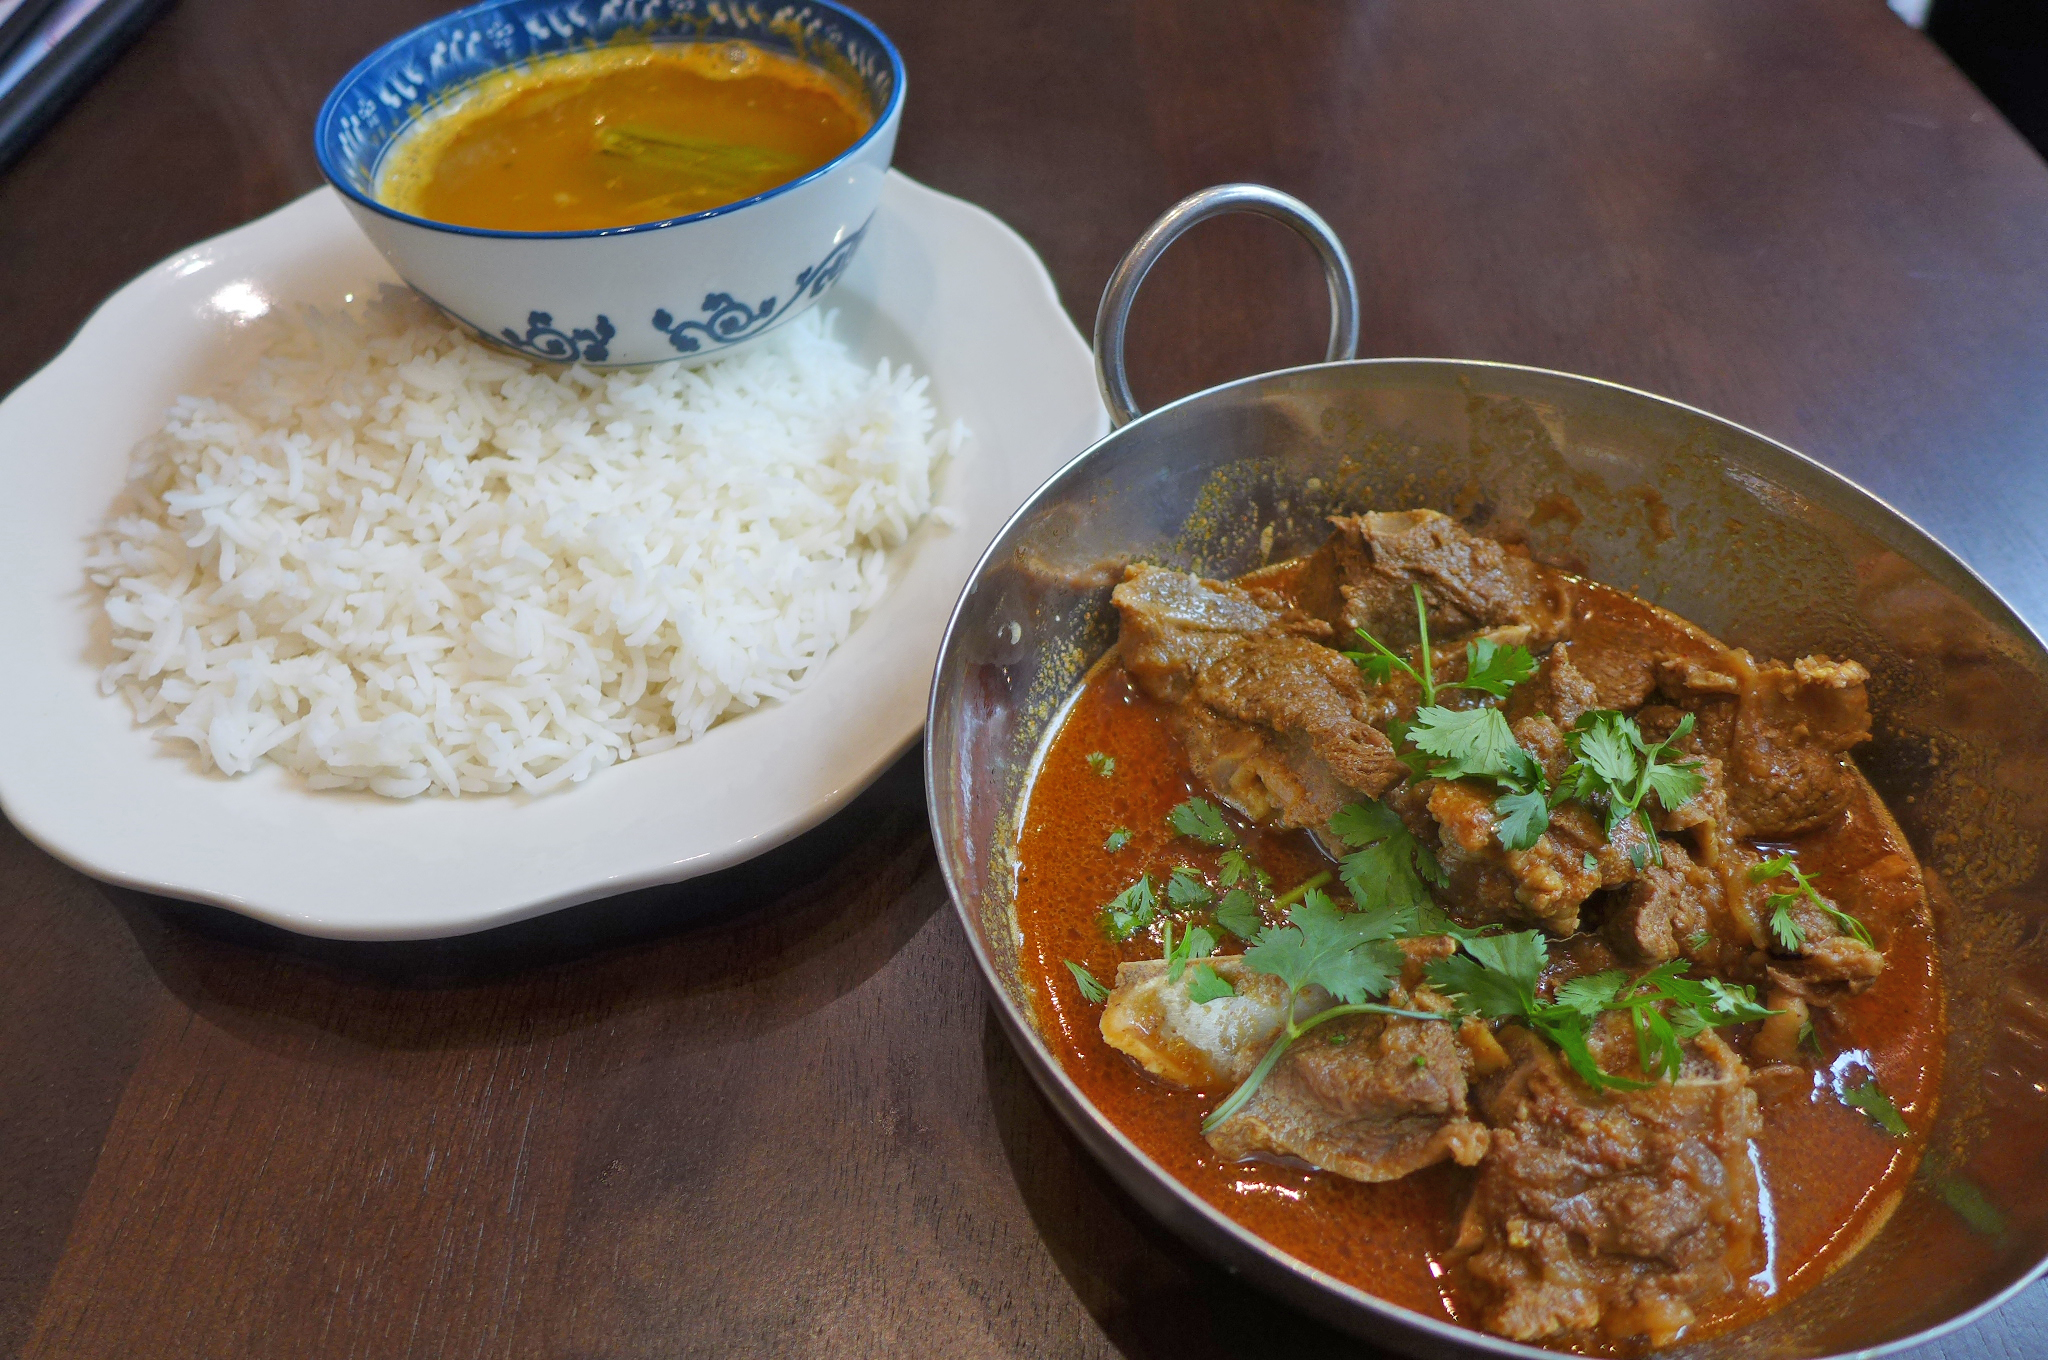 A metal wok of dark red meat curry on the bottom right, with a plate of rice and cup of soup on the upper left.